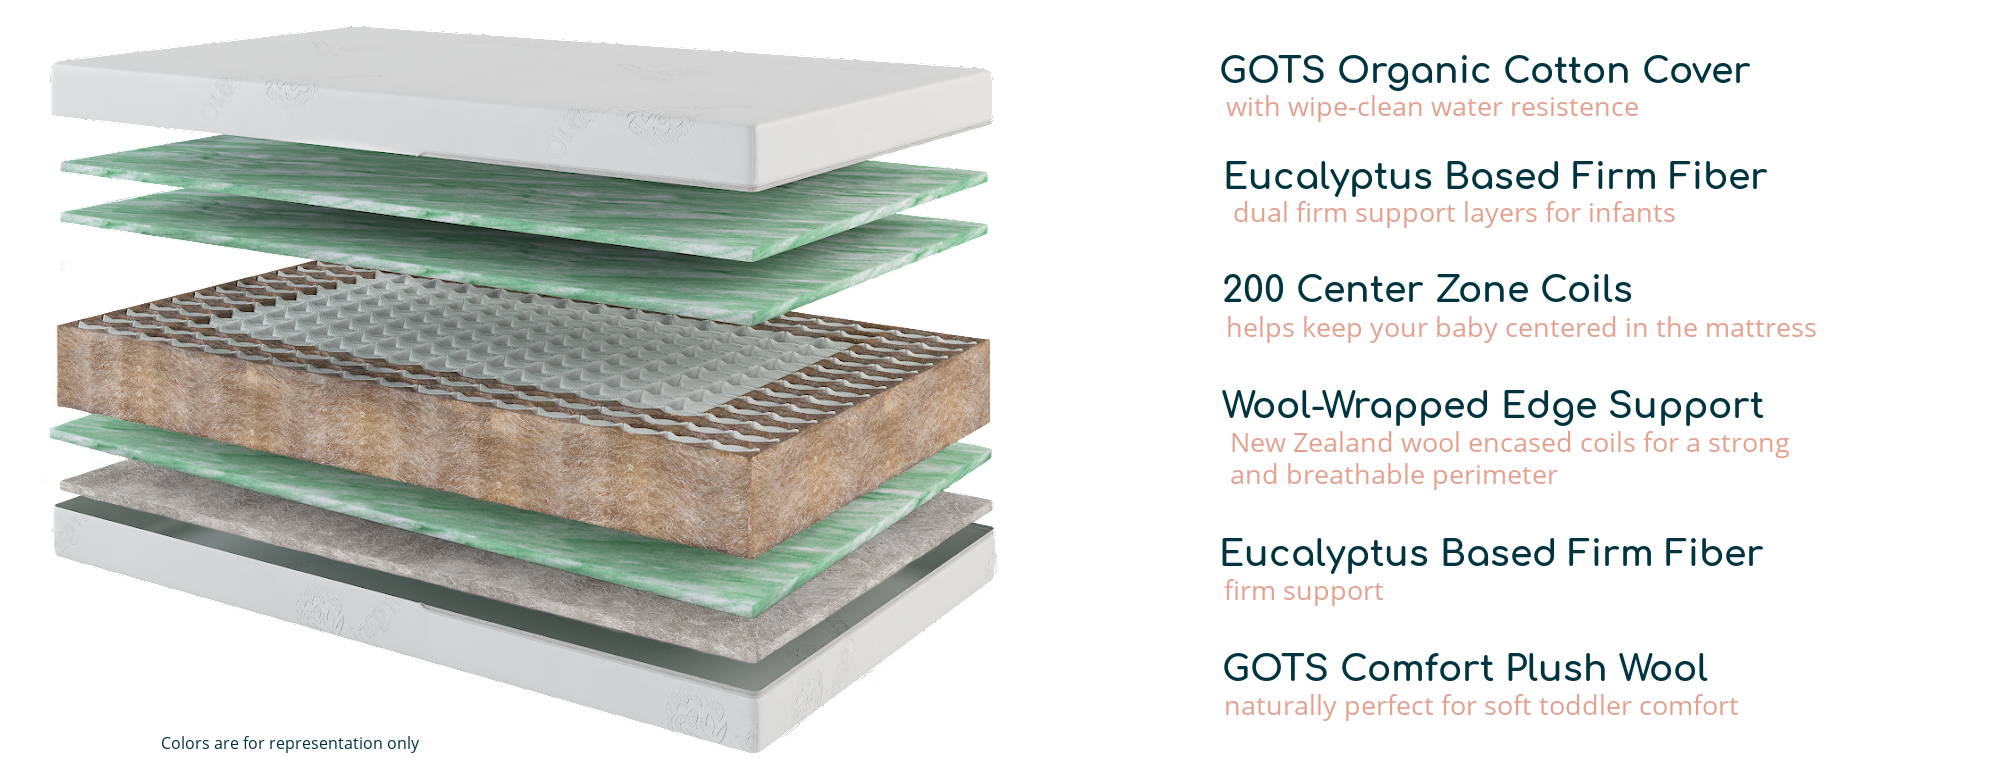 GOTS Organic Cotton Cover-with wipe clean resistance, Eucalyptus Based Firm Fiber 200 Center Zone Coils, Wool Wrapped Edge Support, Eucalyptus Based Firm Fiber, and GOTS Comfort Plush Wool.